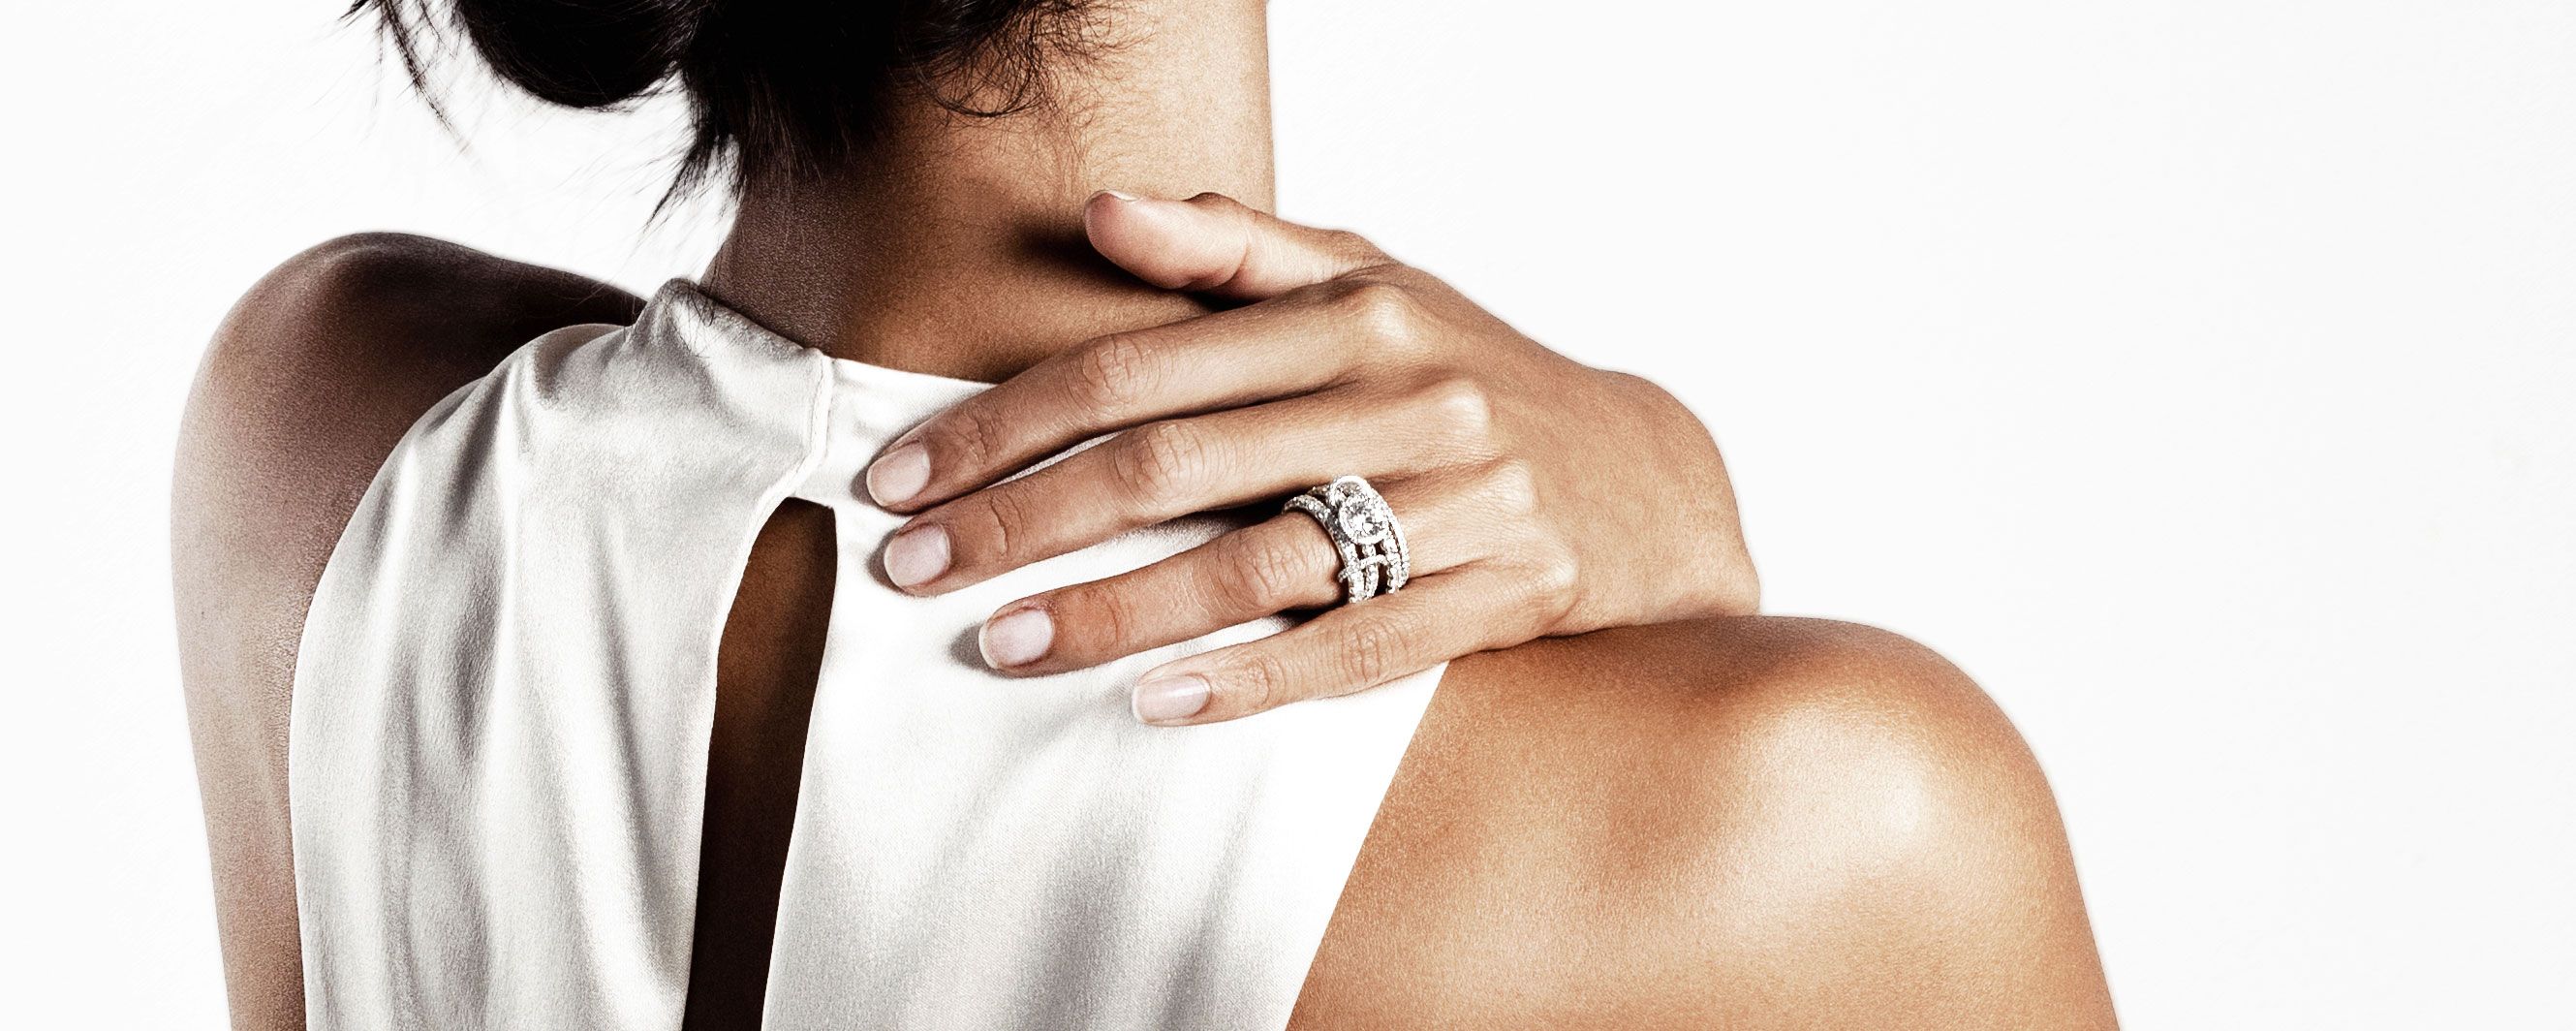 Spinelli Kilcollin image of mother and child's hands against white garment featuring linked rings stacked and spread across fingers, wearing single band, Polaris Blanc and Vela SG Shop in Stock for Mother's Day Luxury Jewelry made to order 